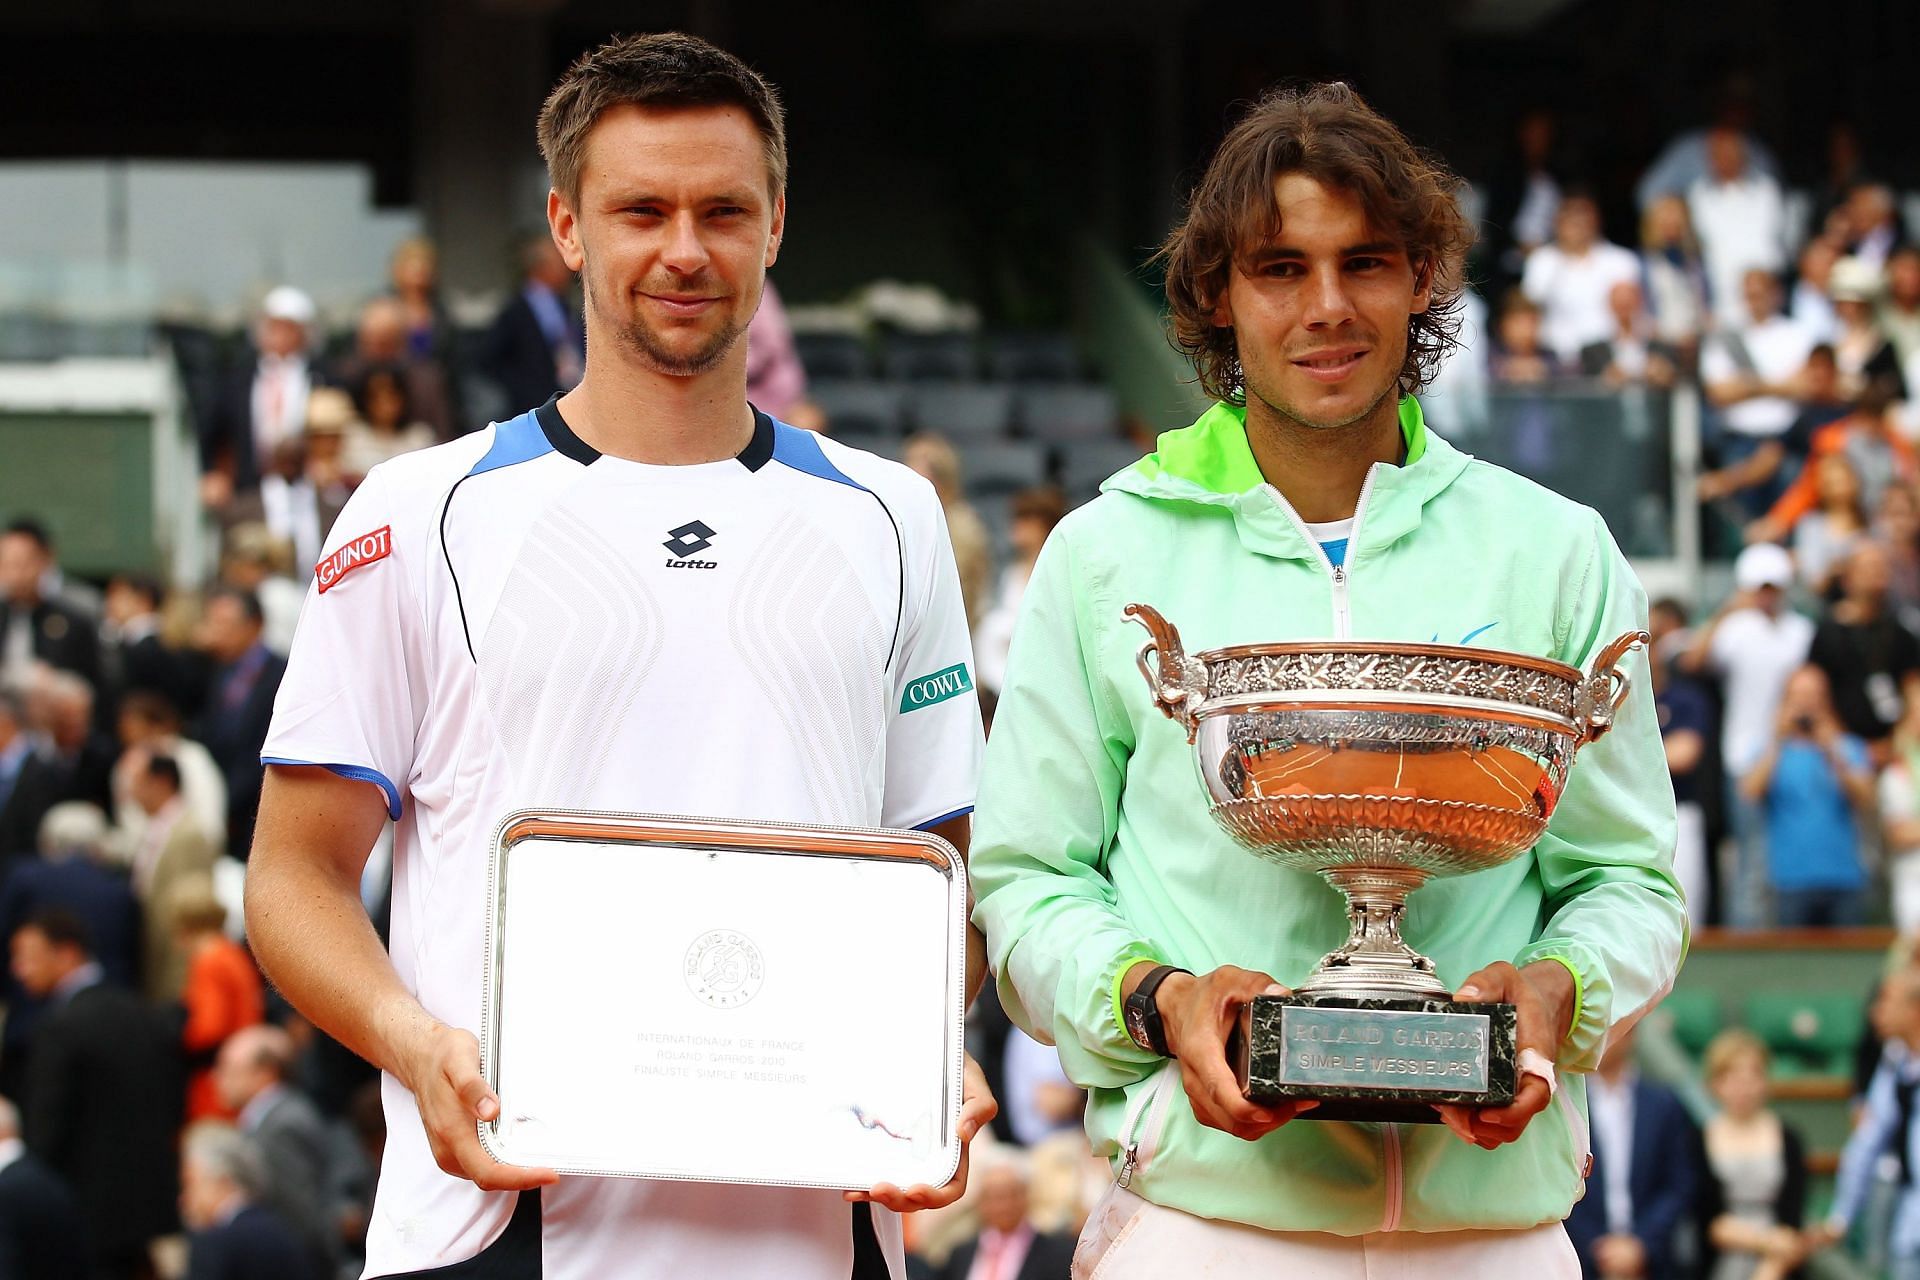 2010 French Open - Rafael Nadal and Robin Soderling